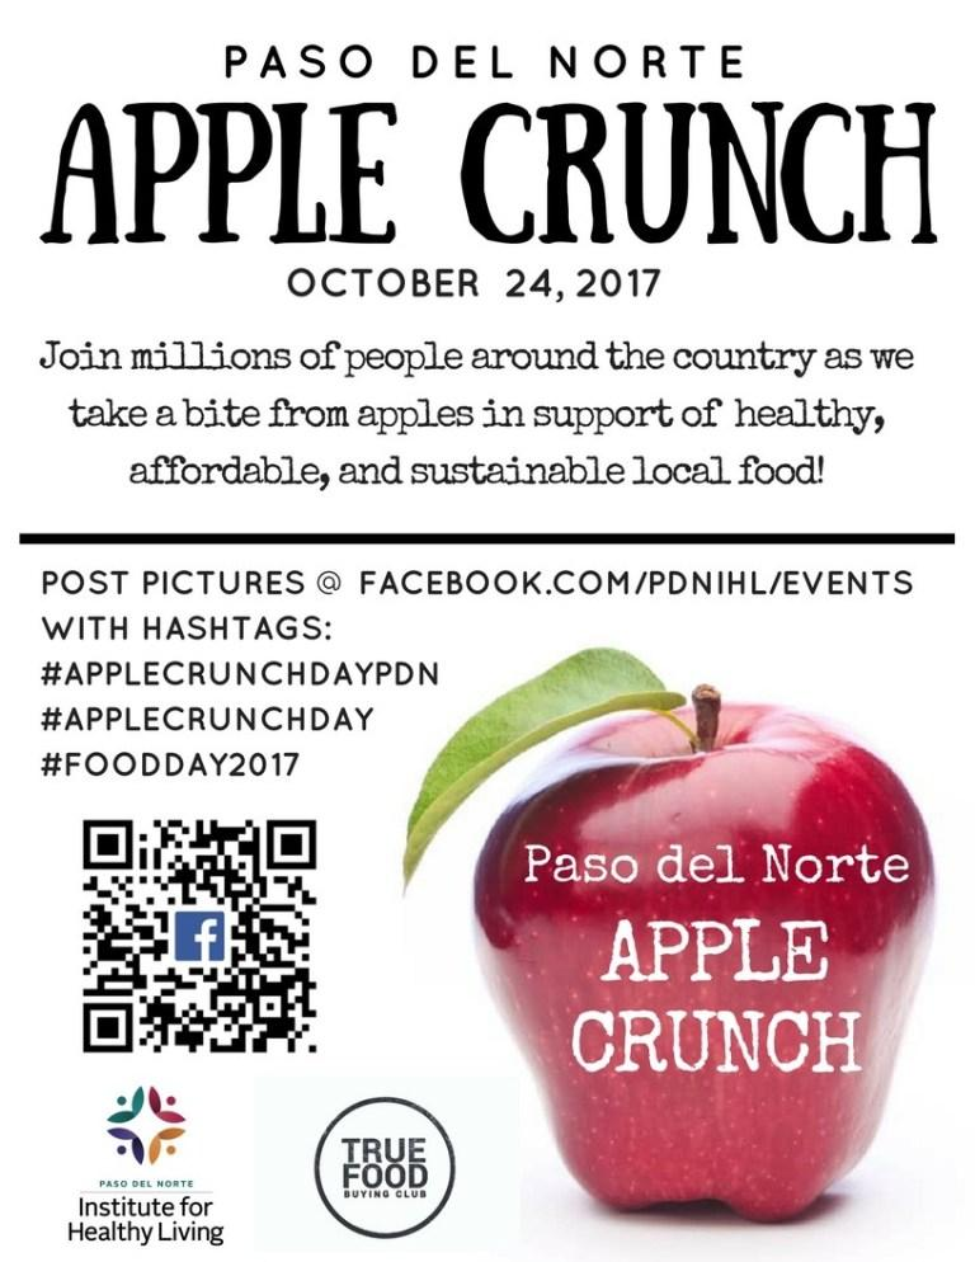 Join millions of people around the country as we take a bite from apples in support of healthy, affordable, and sustainable local food!